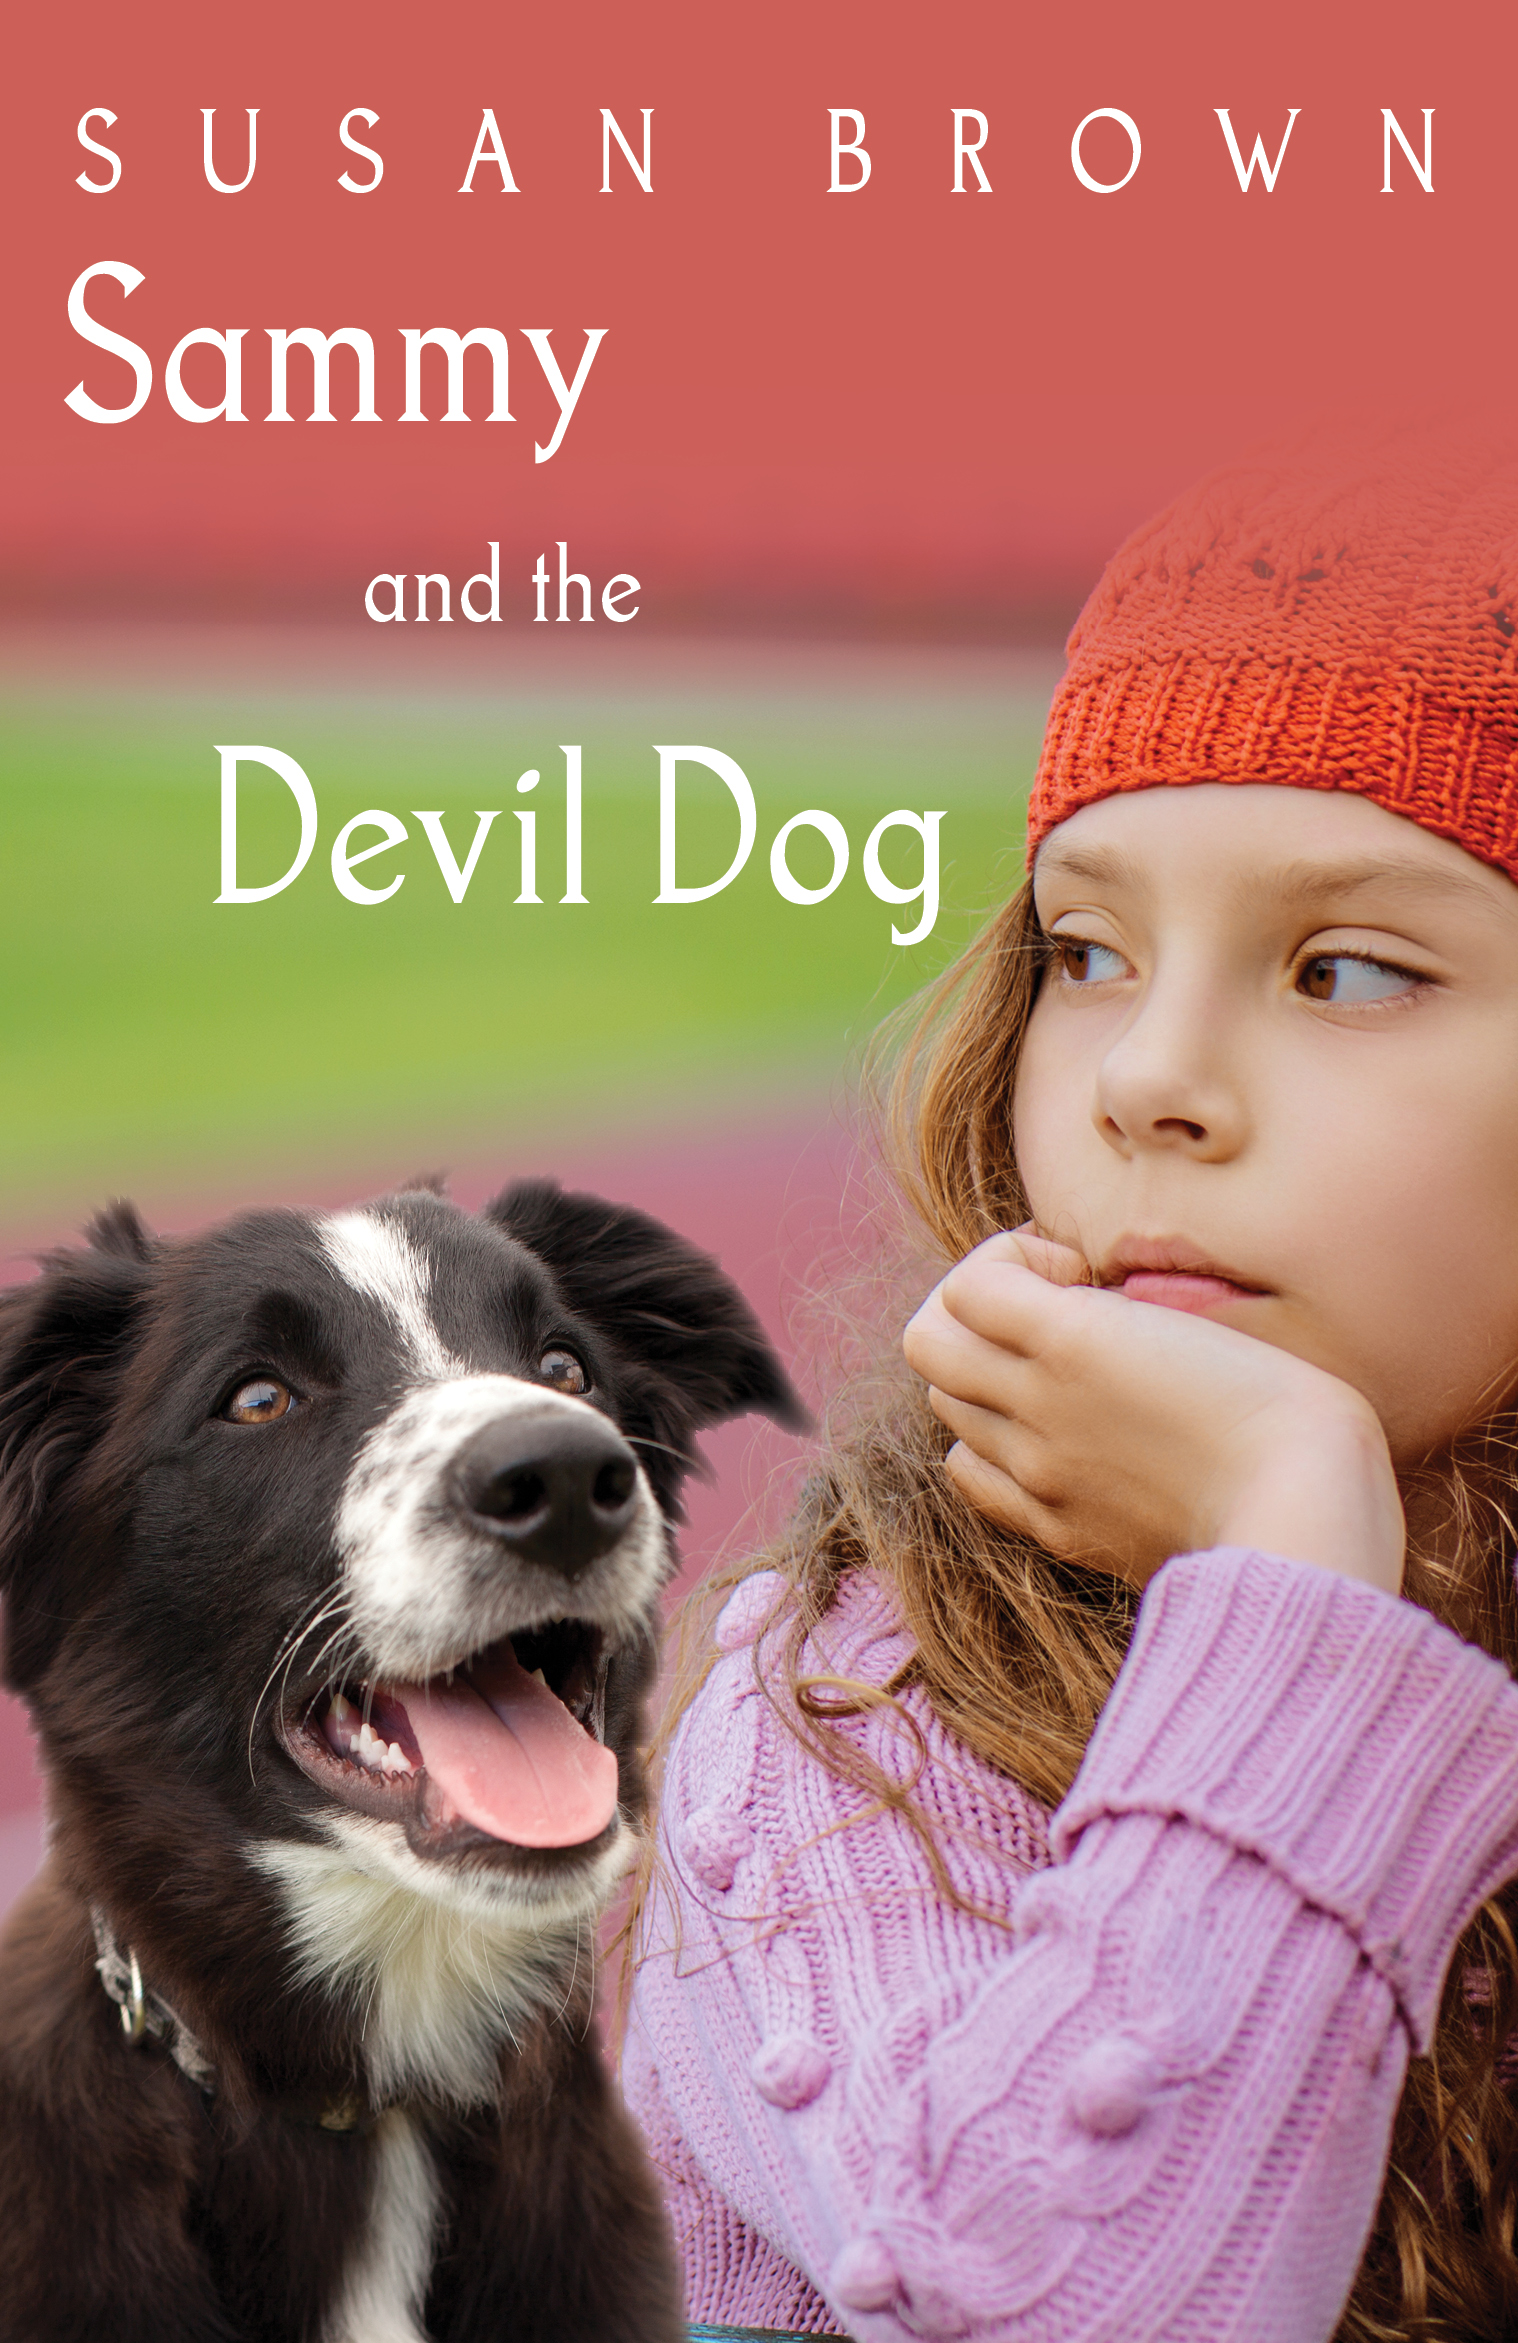 Sammy and the Devil Dog by Susan Brown